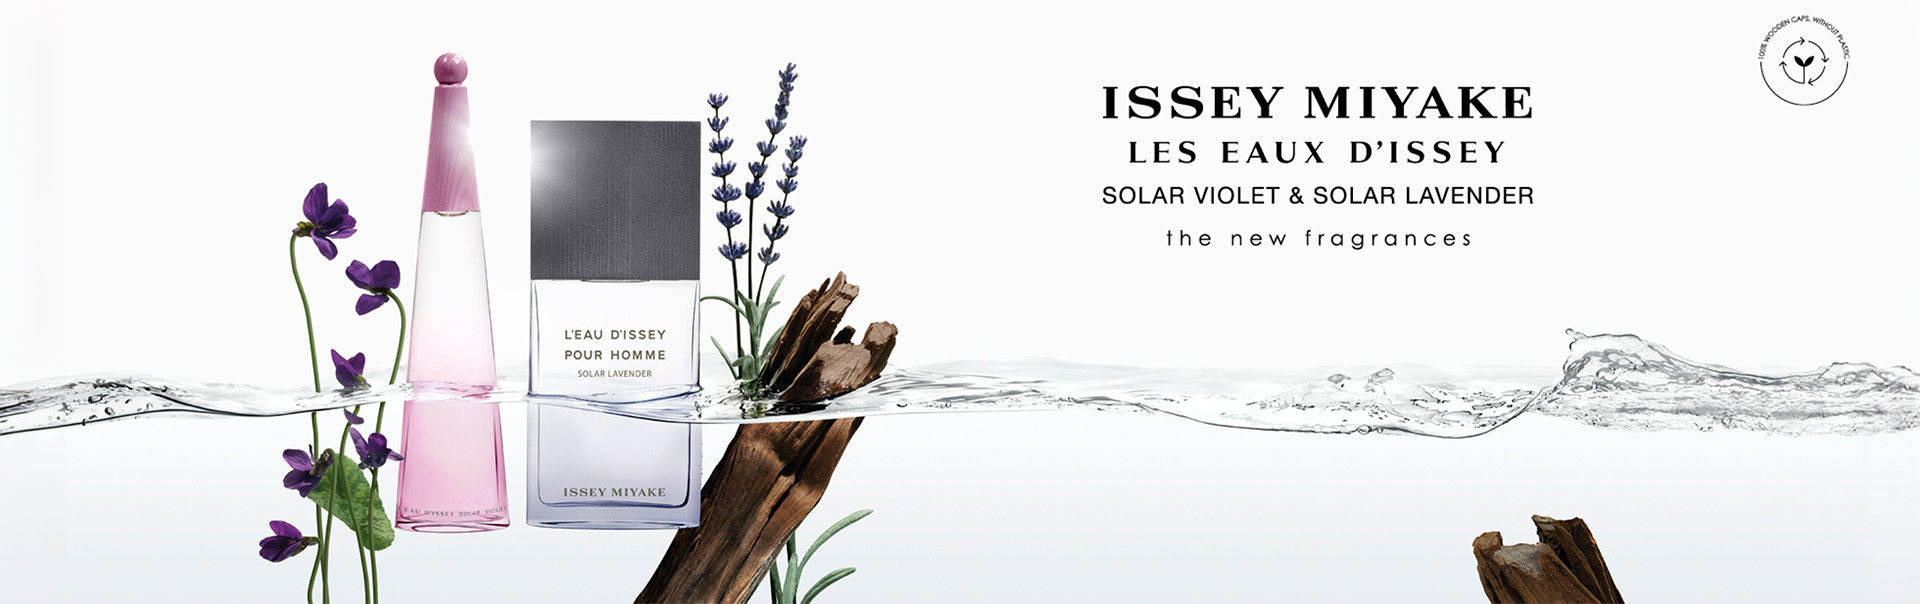 ISSEY MIYAKE - LES EAUX D'ISSEY